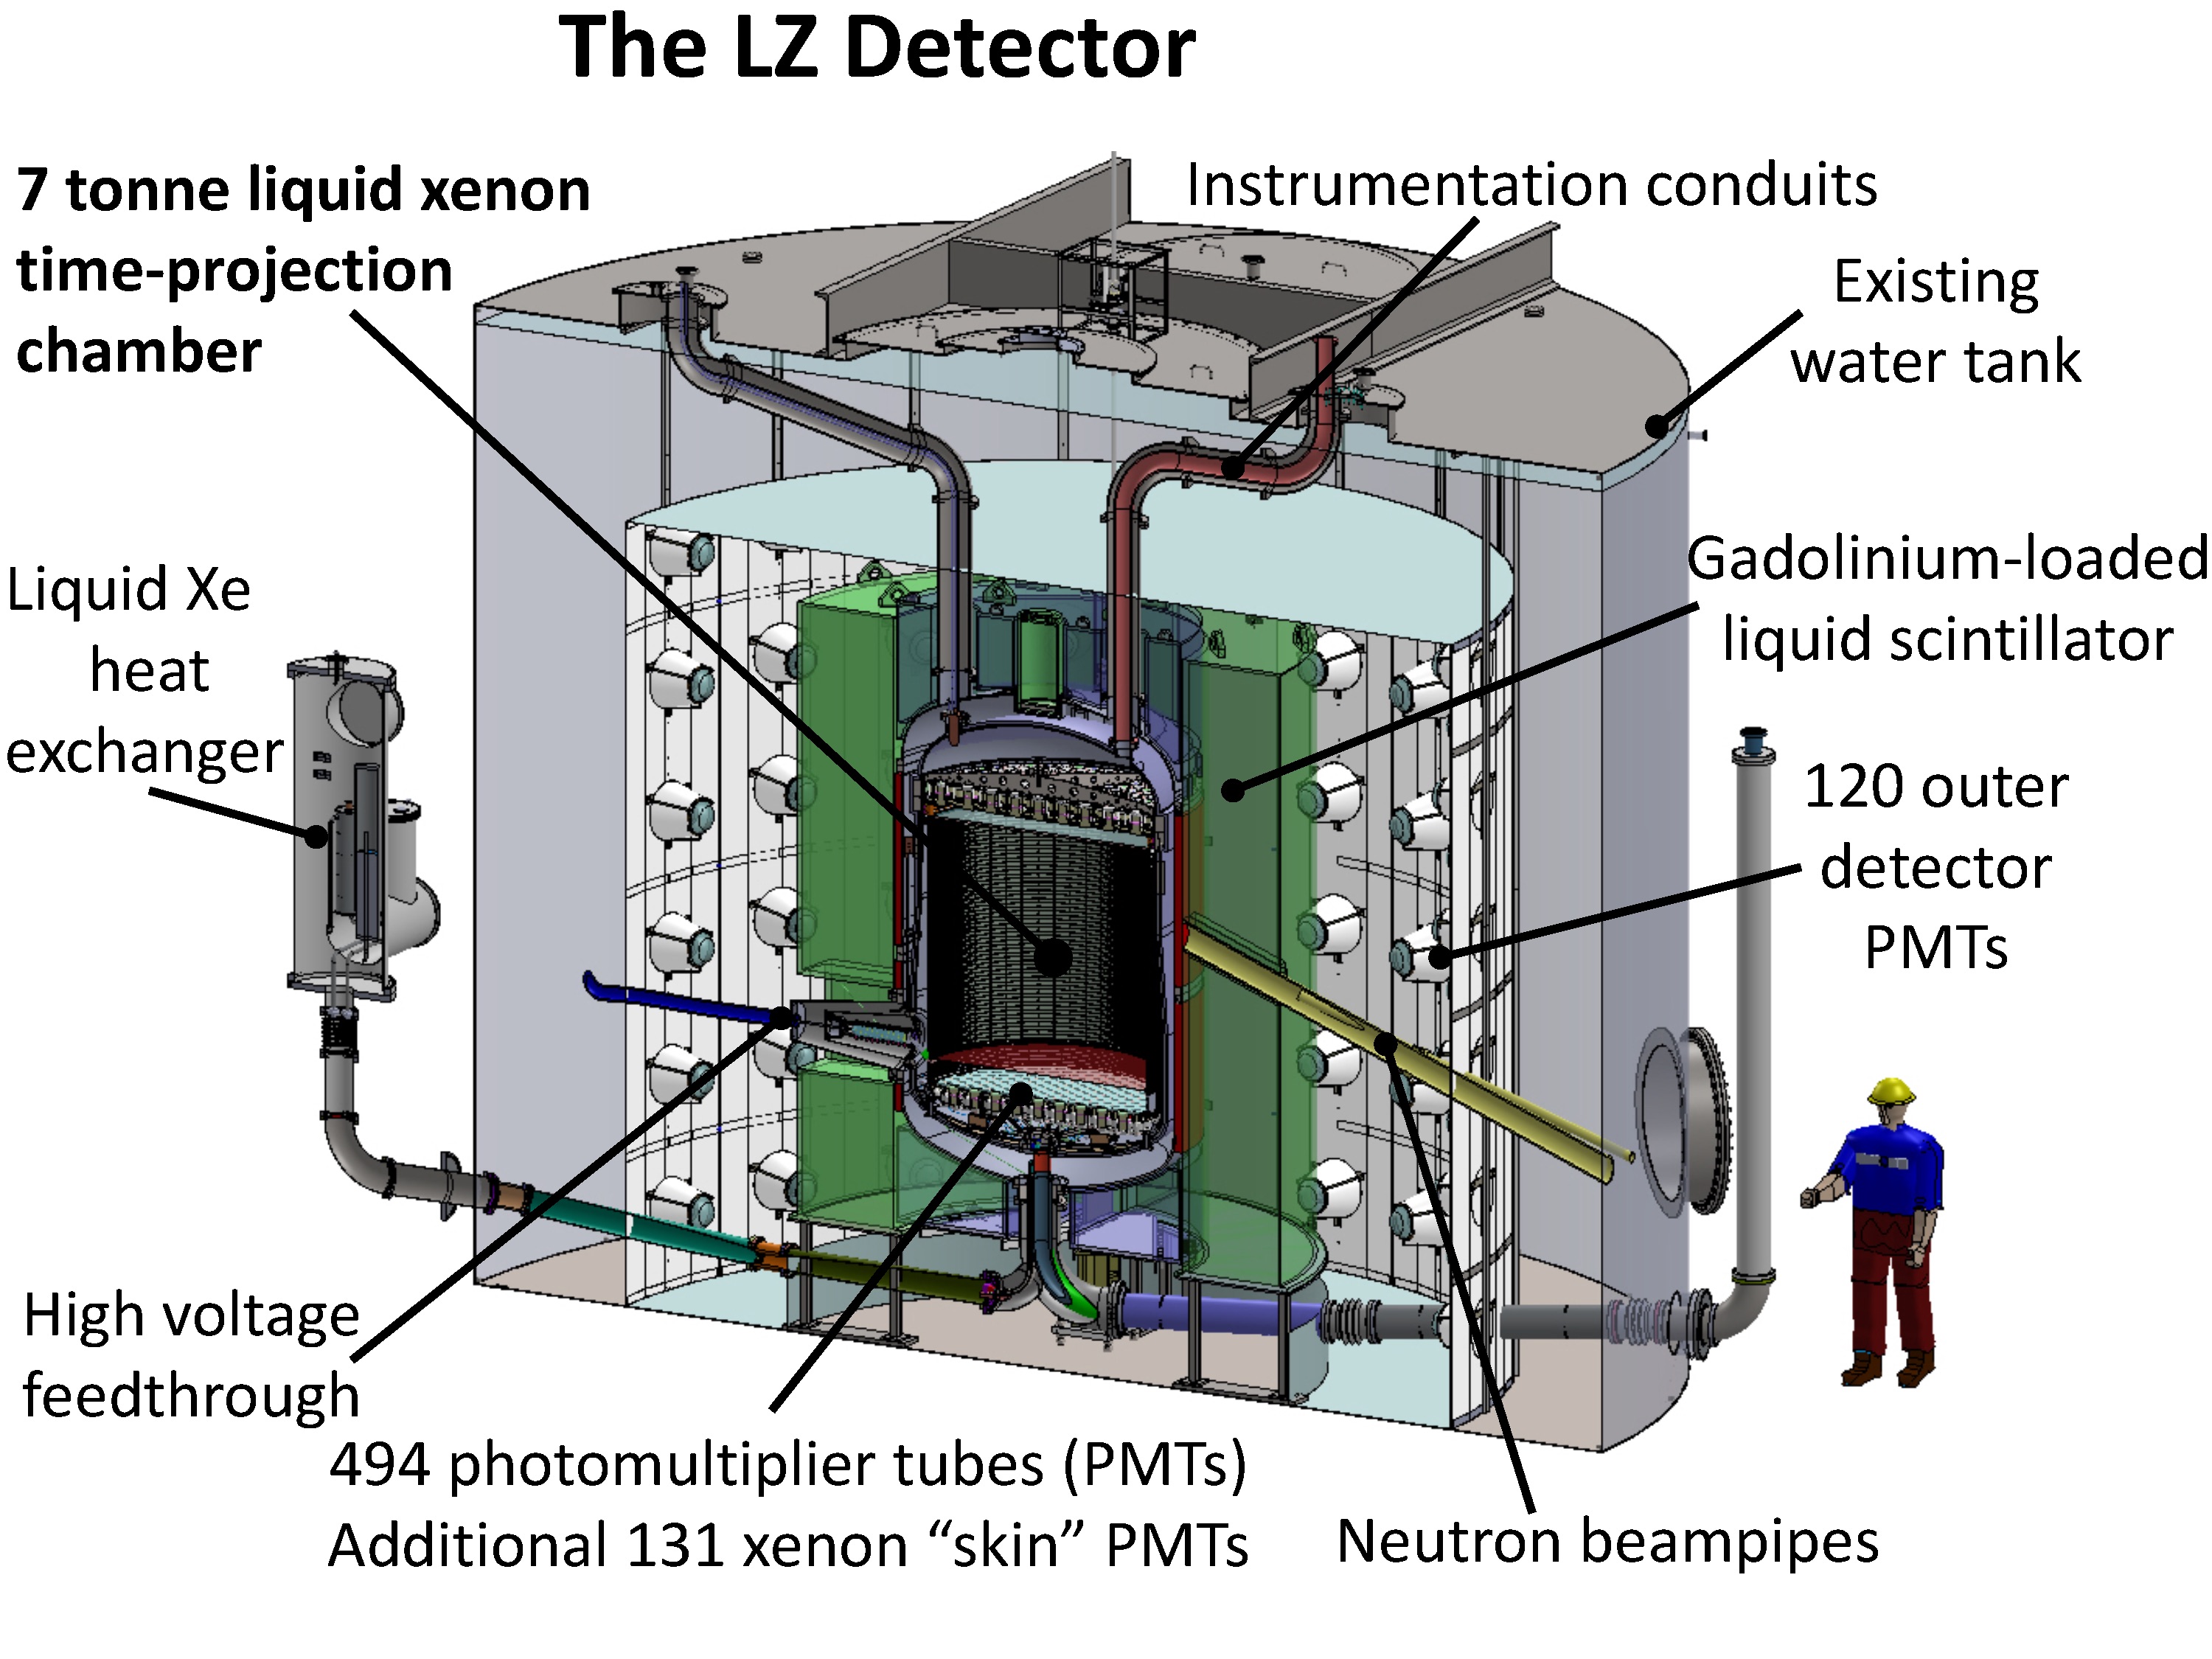 Hunting for Dark Matter with Liquid Xenon Detectors:A Race to Make History